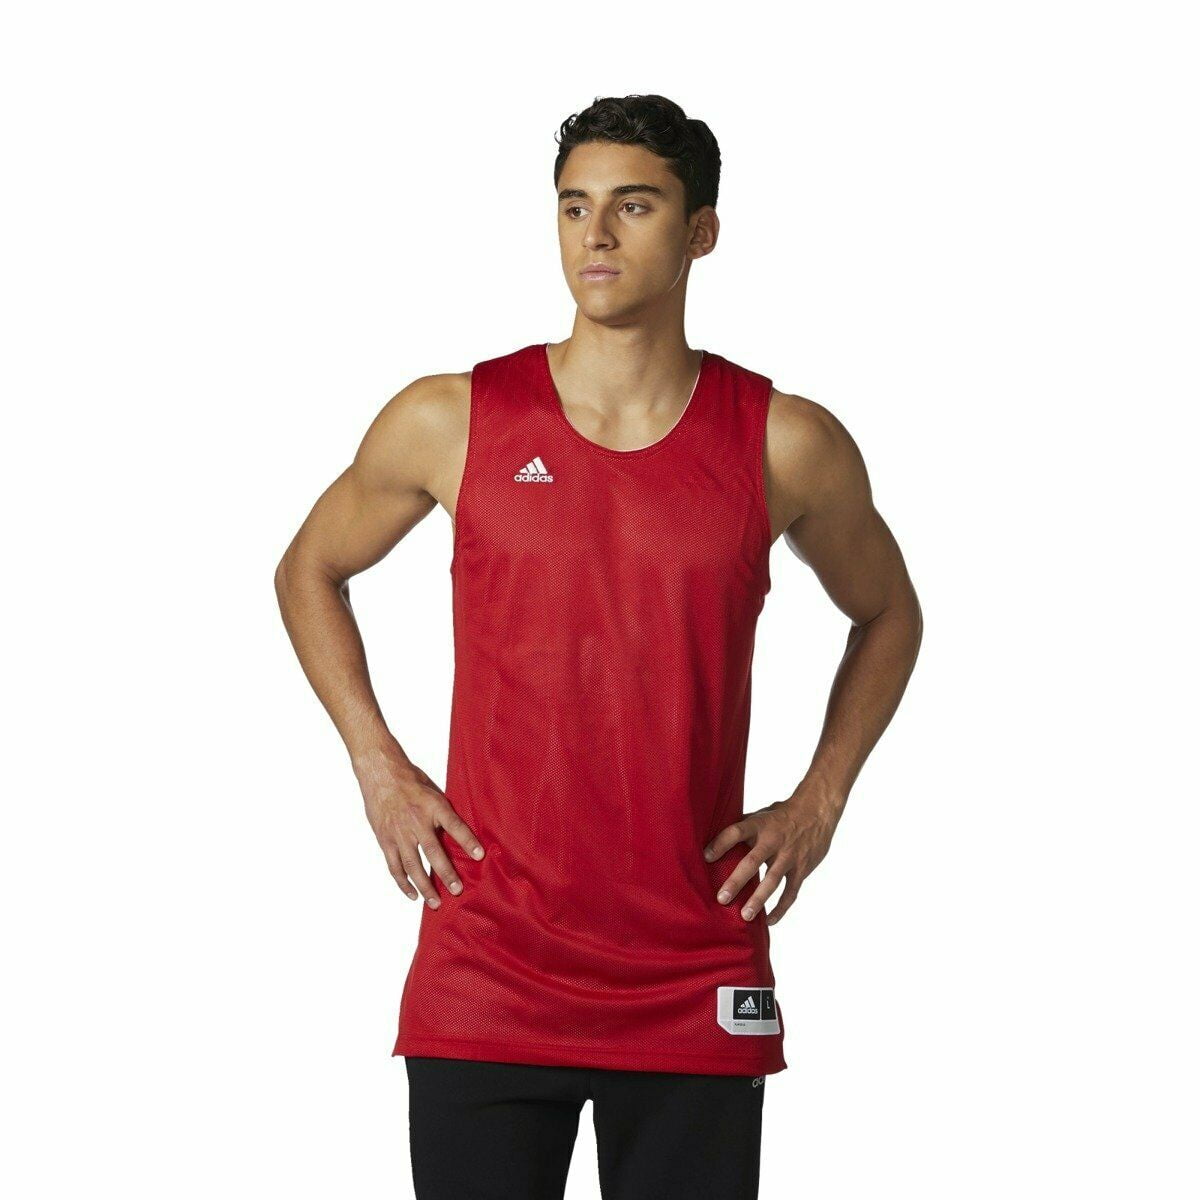 Adidas Jersey Mens Large Red Team Performance Blank Basketball Jersey Big  Tall